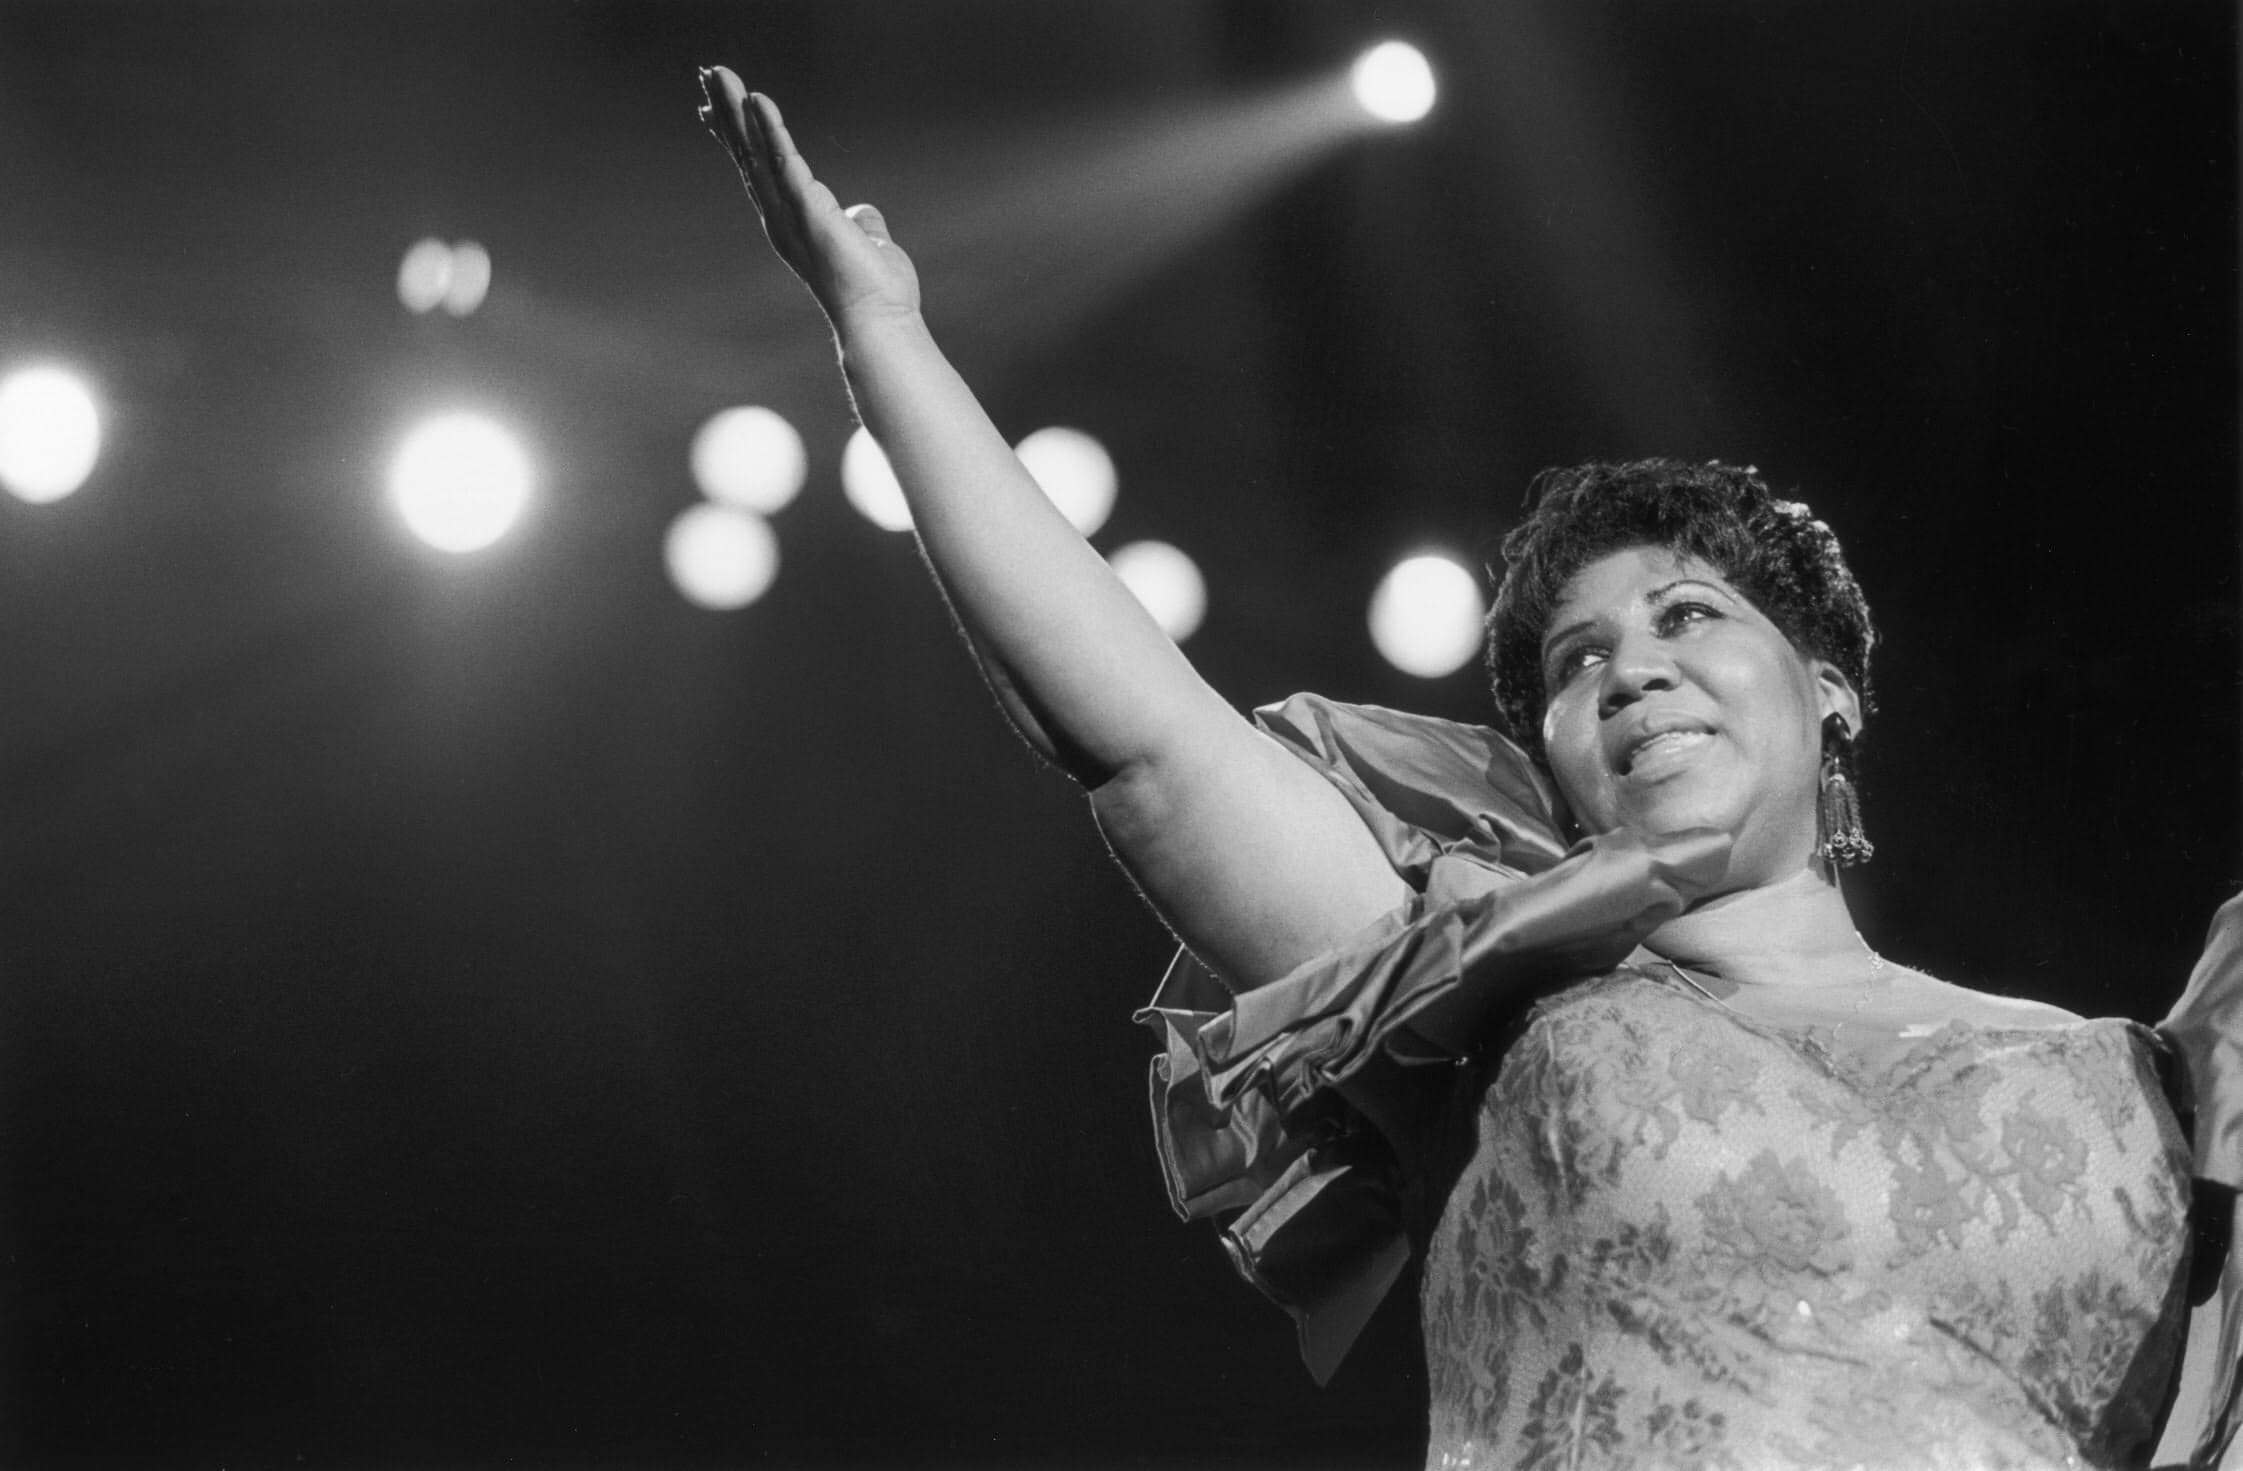 New York City’s Subway System Pays ‘Respect’ to Aretha Franklin